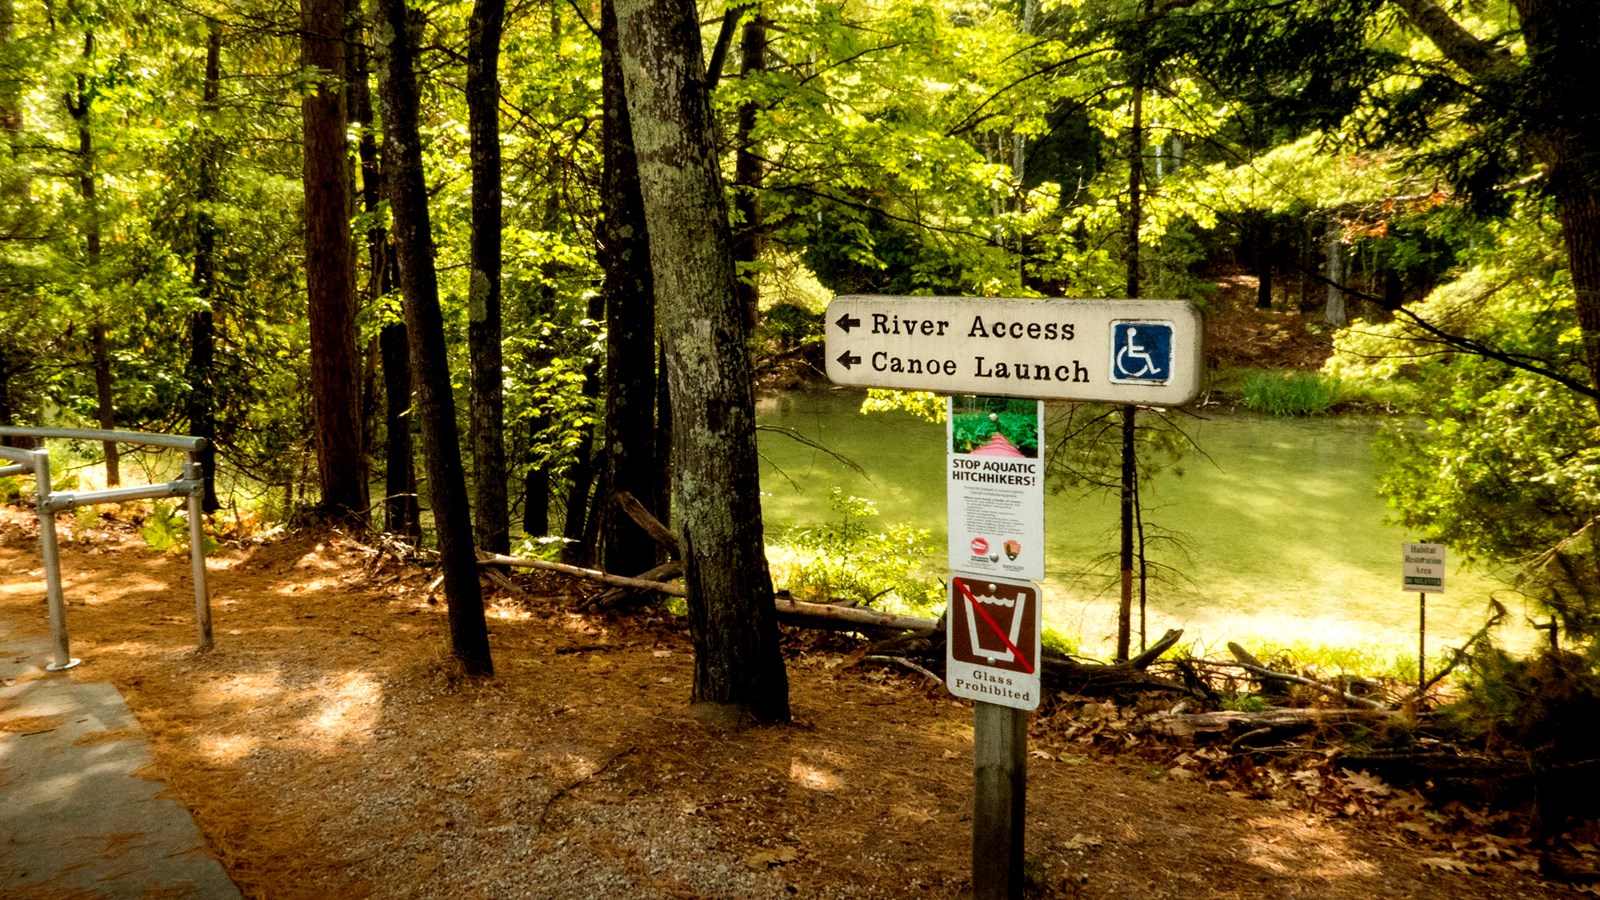 Standing along a path along a green river, a wooden sign leads to the river and the access